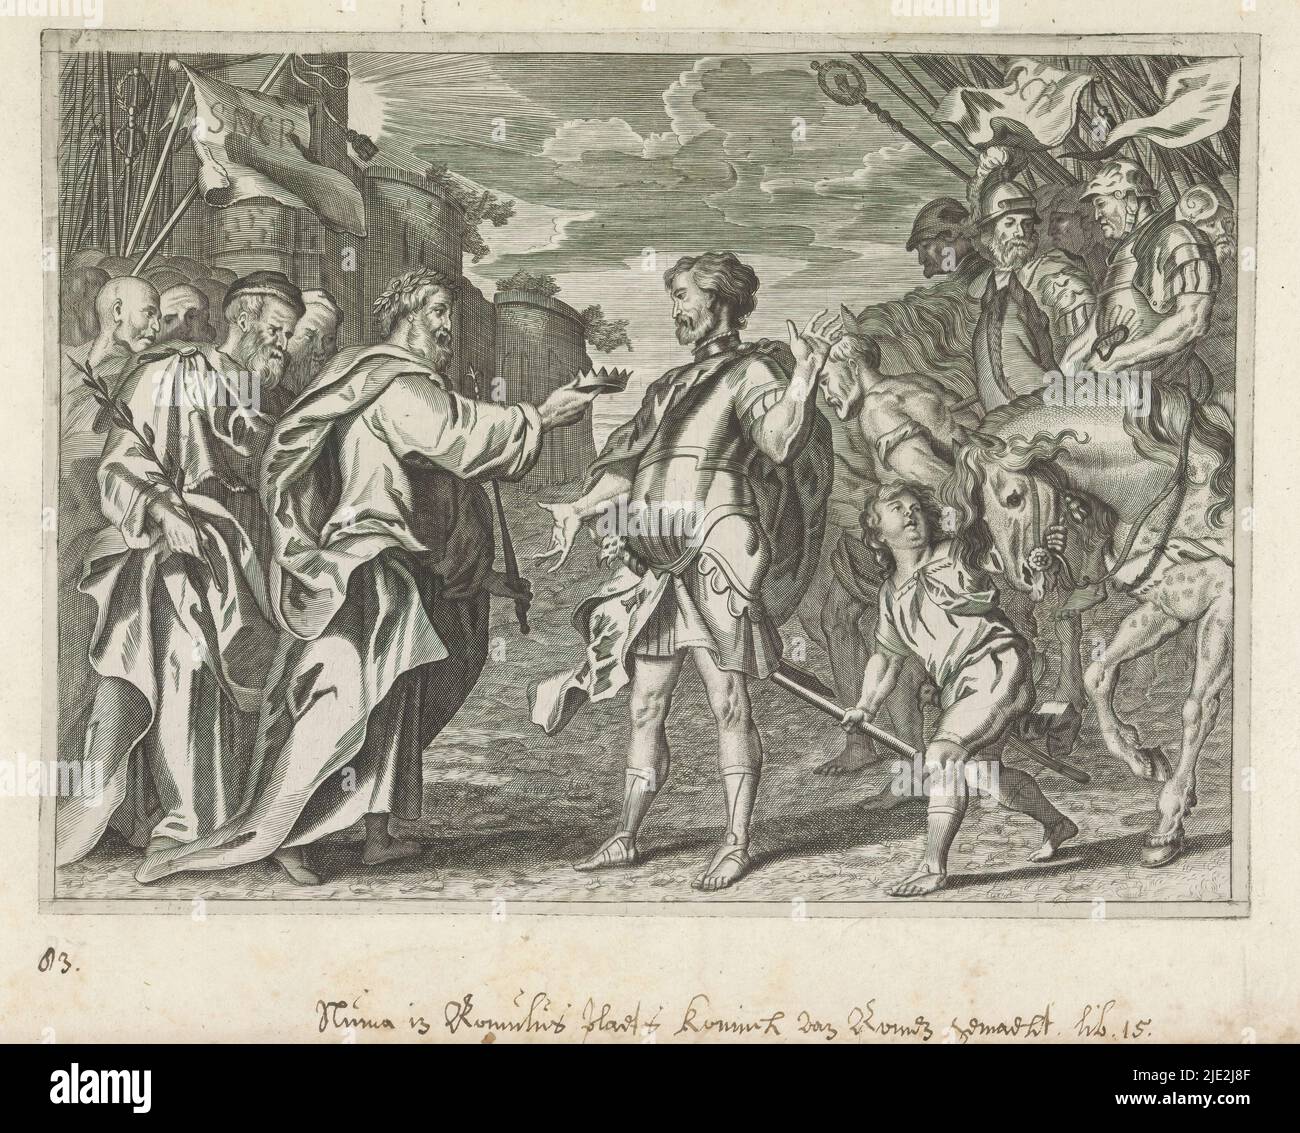 Numa Pompilius is appointed king of Rome, Metamorphoses of Ovid (series title), To Numa Pompilius the crown is handed over after the disappearance of Romulus, the founder of Rome. On either side Latins and Sabines., print maker: Petrus Clouwet, after design by: Anthony van Dyck, (possibly), after design by: Theodoor van Thulden, (possibly), c. 1636 - 1670, paper, engraving, height 165 mm × width 227 mm Stock Photo